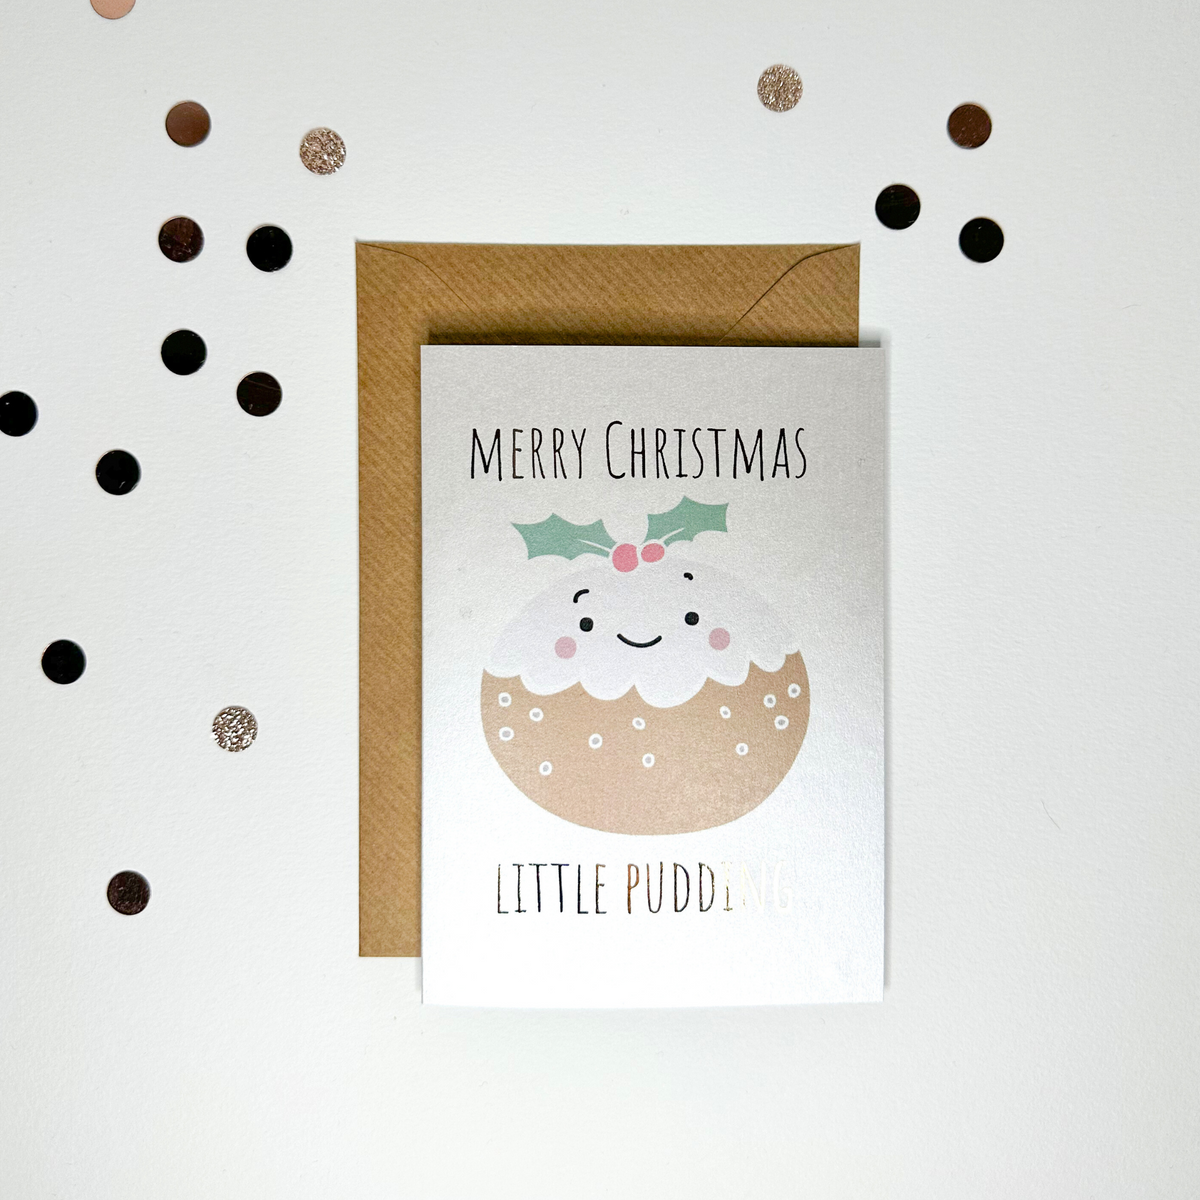 Baby's First Christmas Greeting Cards